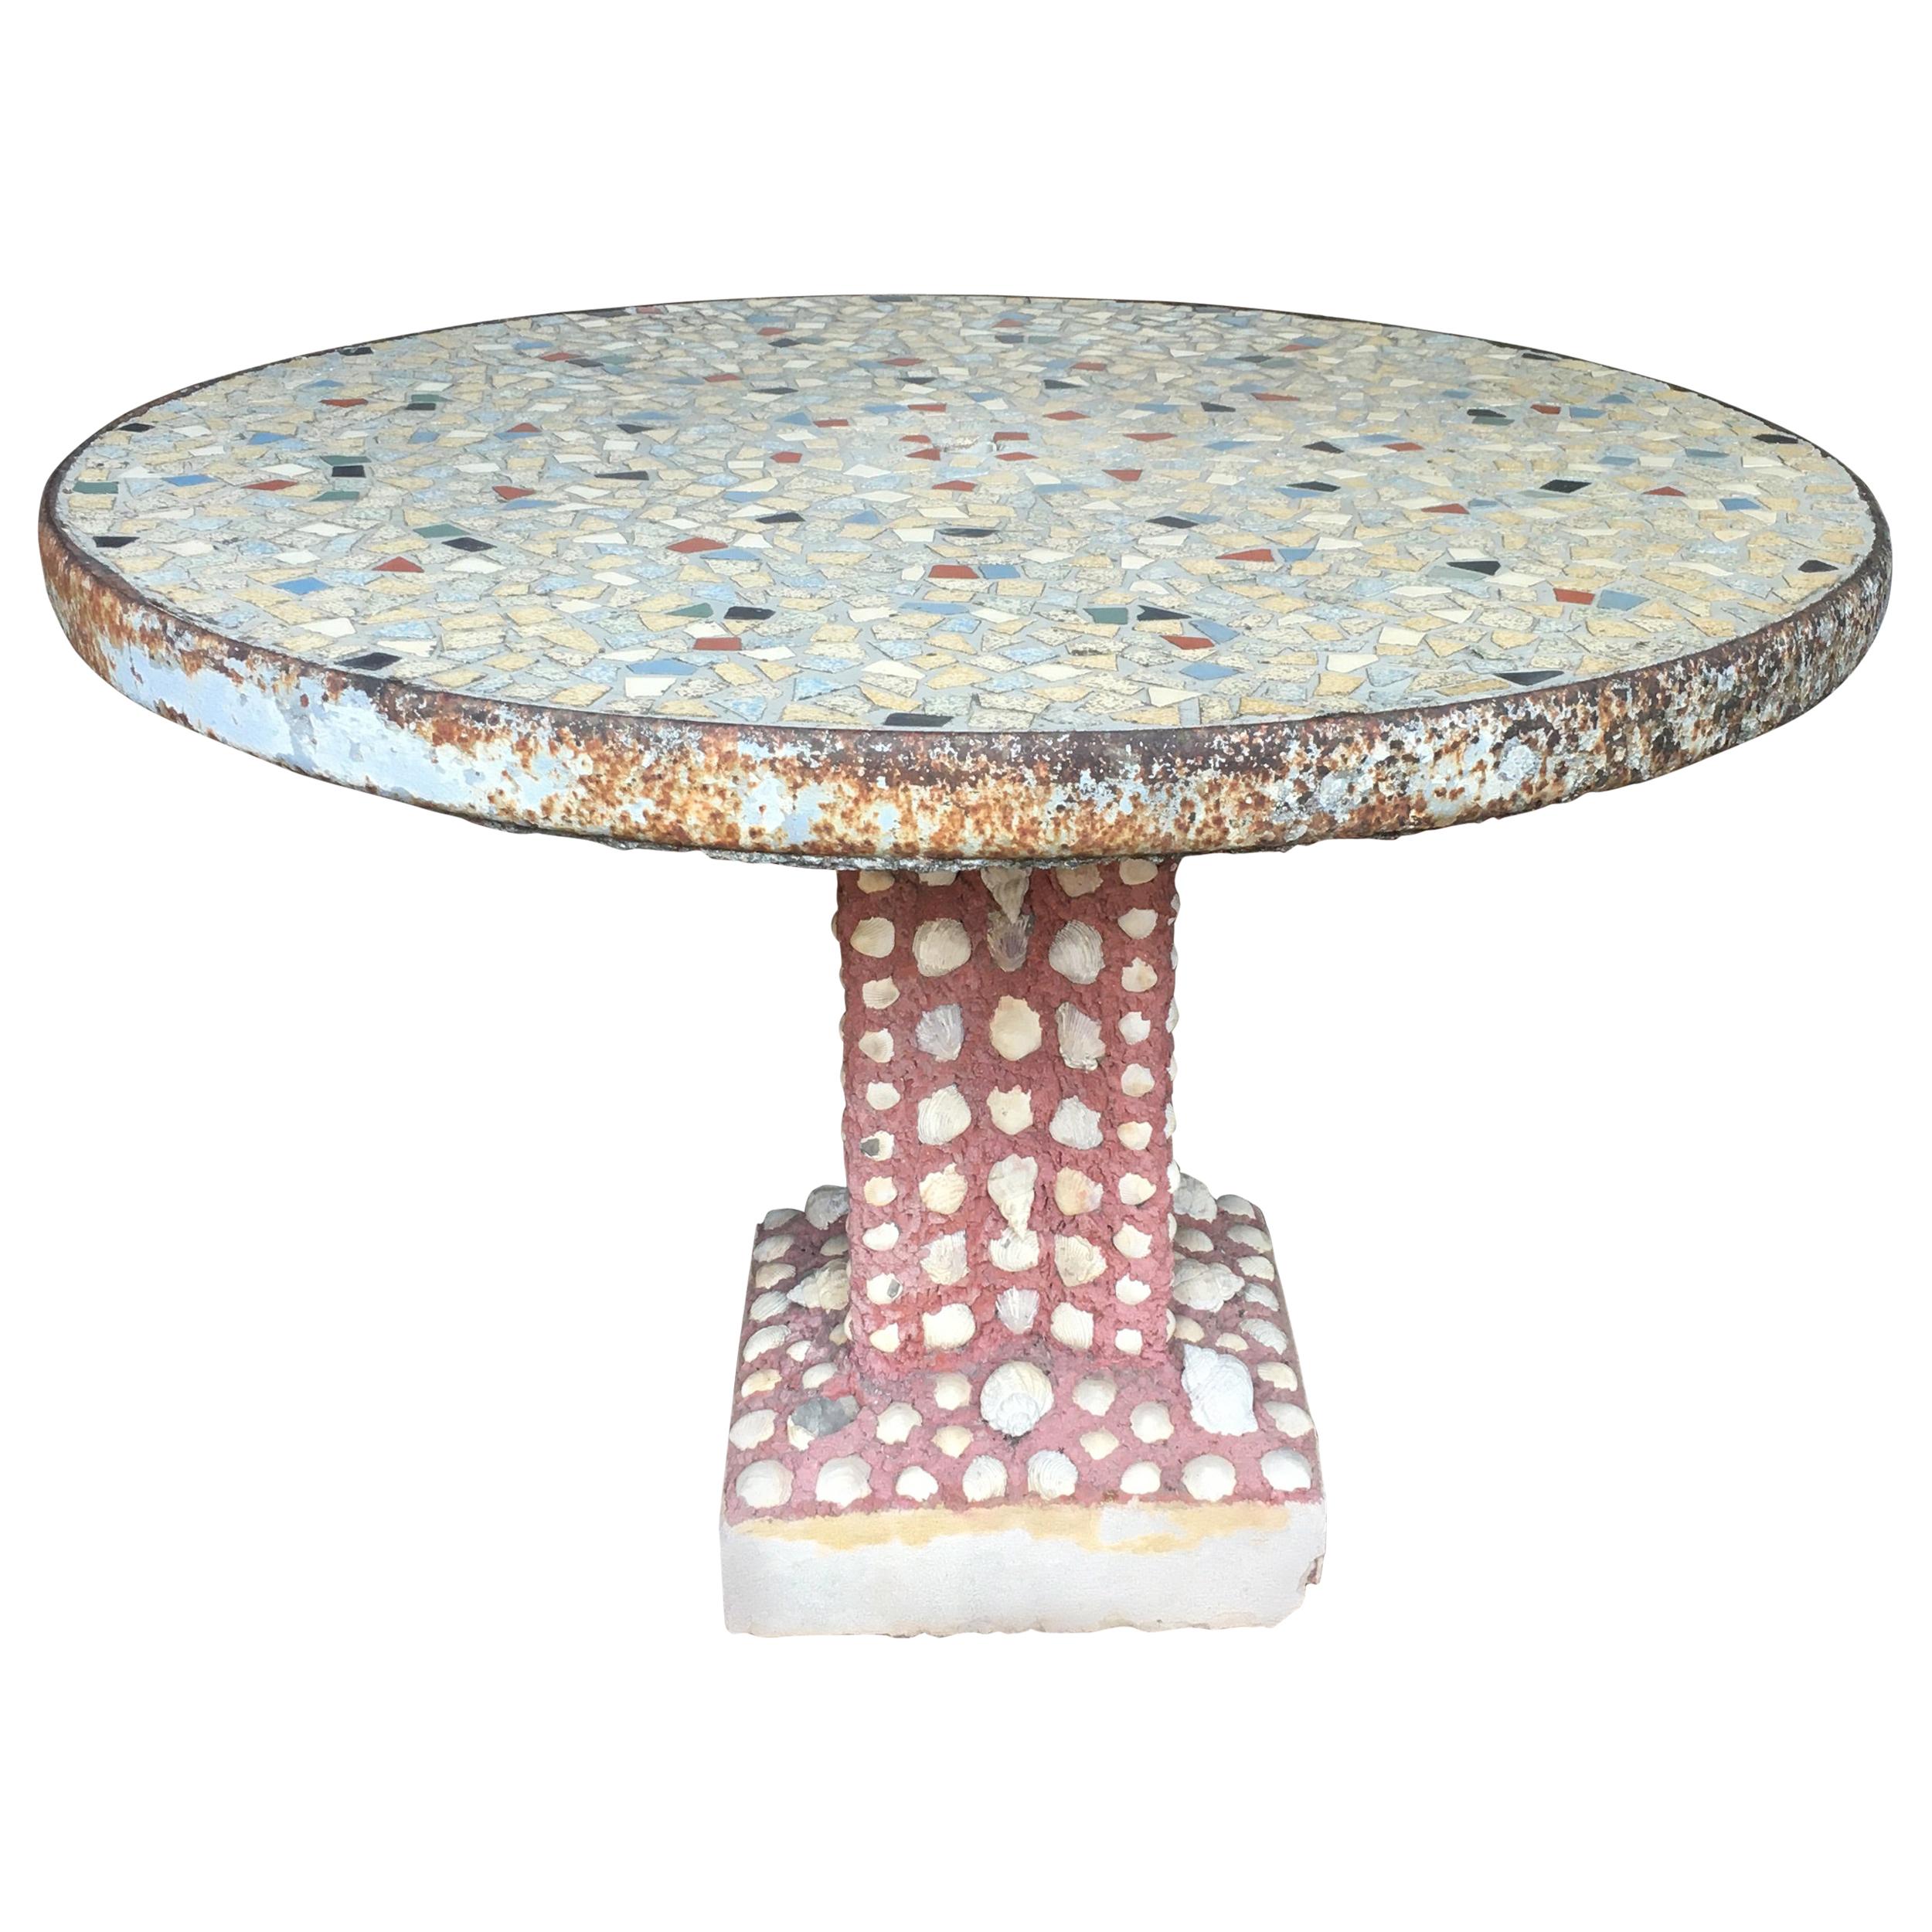 Mid-Century Modern Italian Garden Table with Mosaic and Shells, 1960s im Angebot